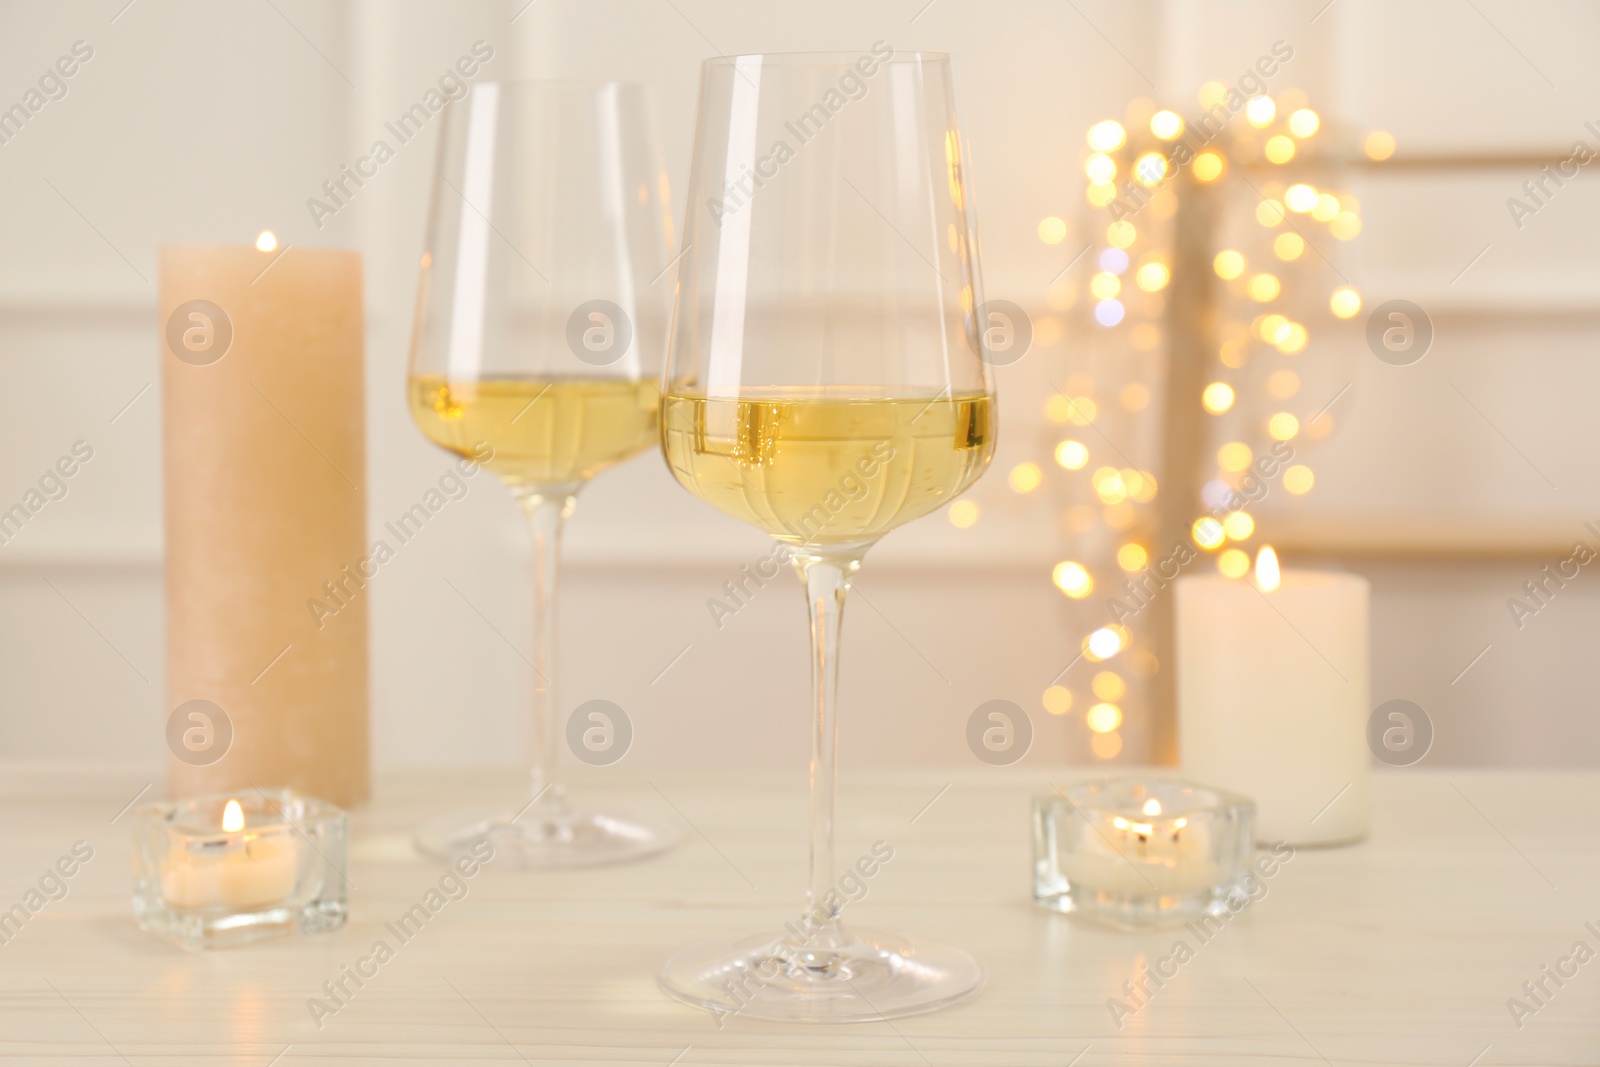 Photo of Glasses of wine and candles on wooden table